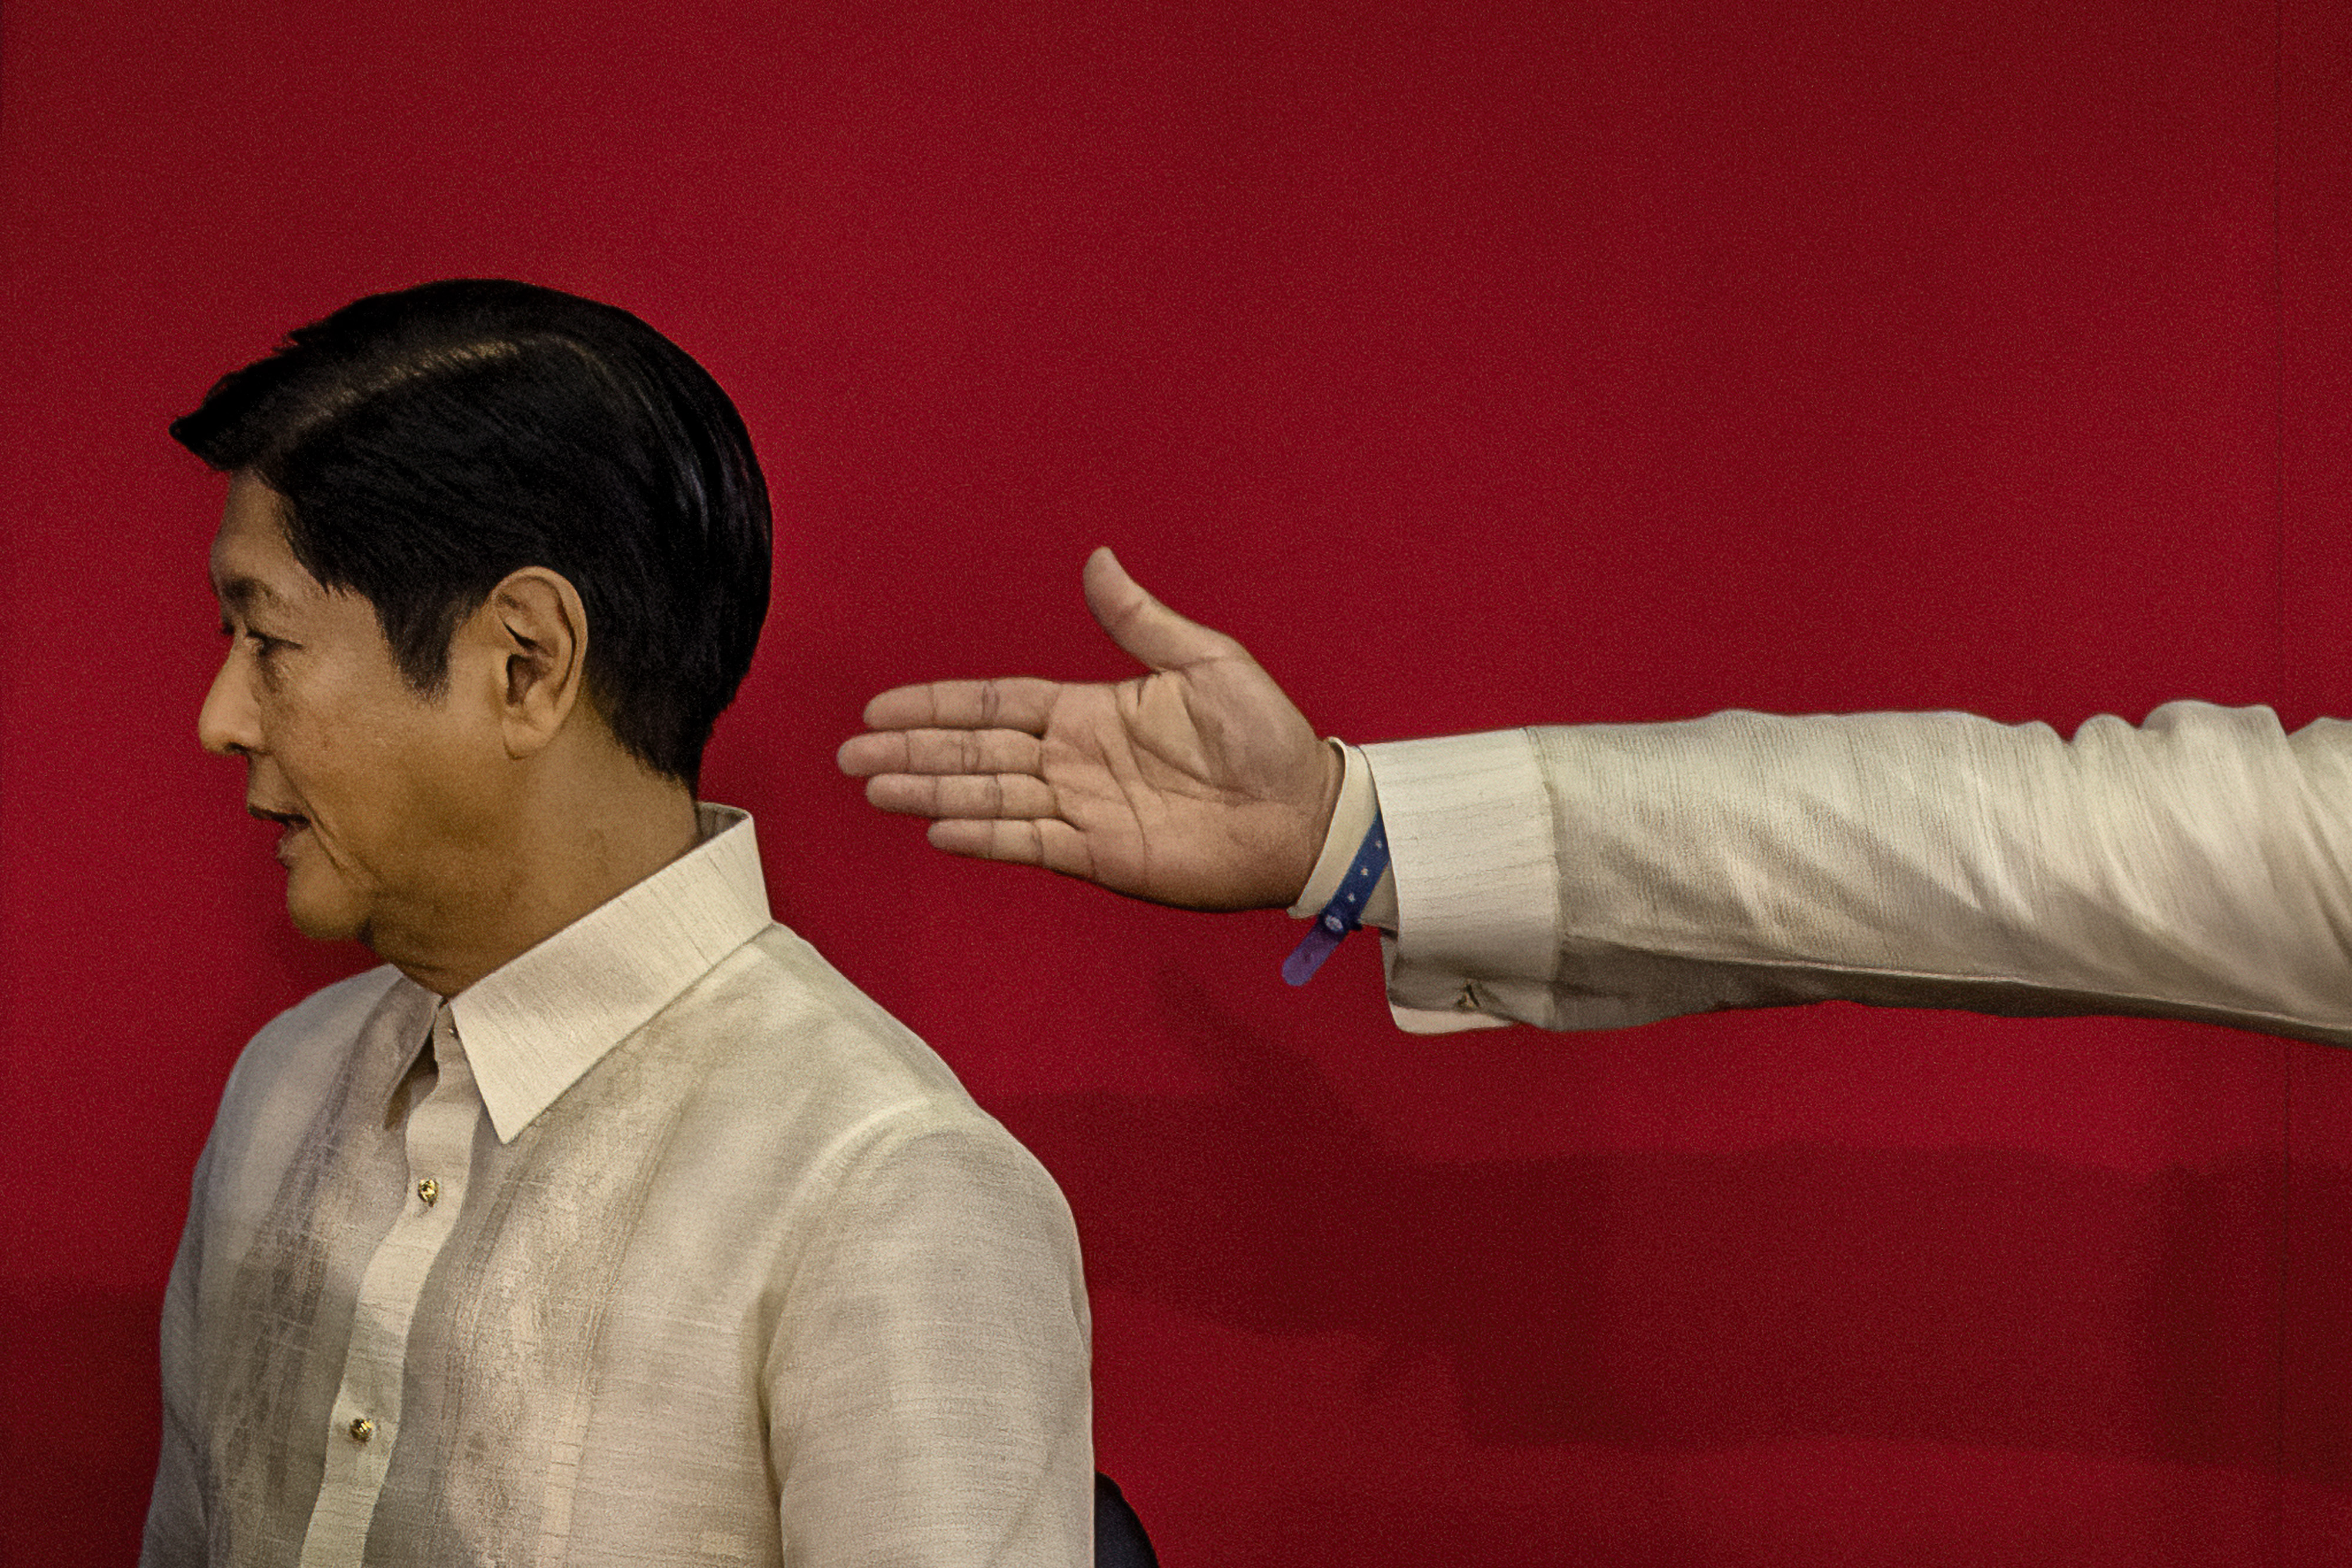 Philippine President Ferdinand "Bongbong" Marcos Jr. prepares to deliver his first State of the Nation Address in Manila on July 25, 2022. (Ezra Acayan—Getty Images)